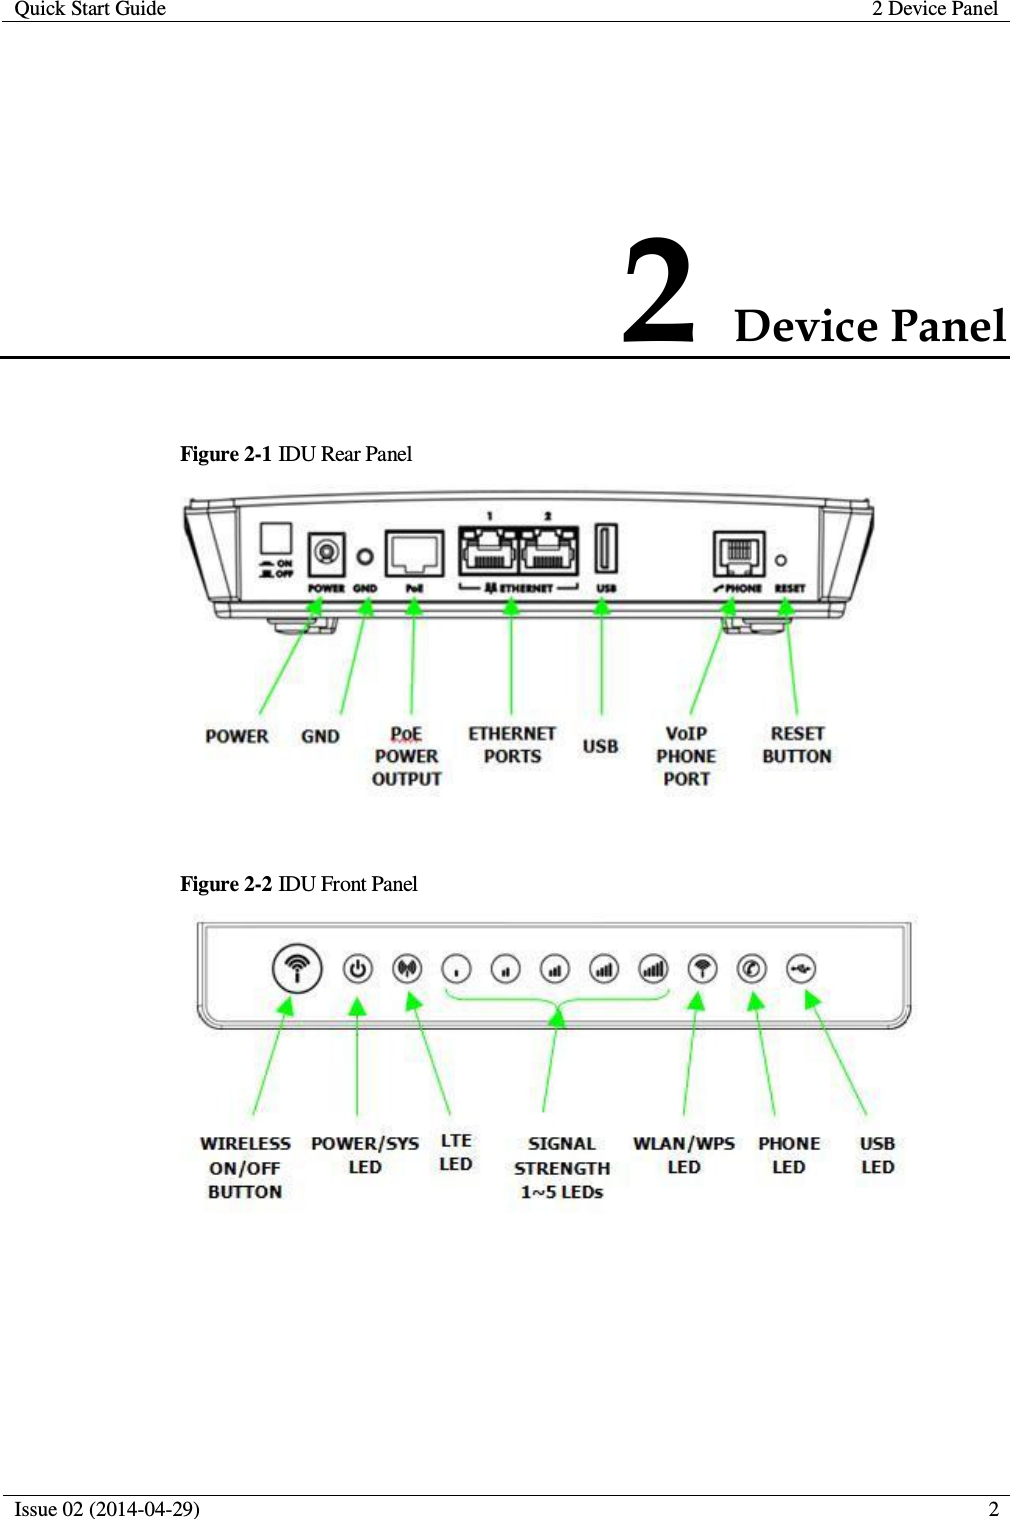 Quick Start Guide 2 Device Panel  Issue 02 (2014-04-29)  2  2 Device Panel Figure 2-1 IDU Rear Panel   Figure 2-2 IDU Front Panel   